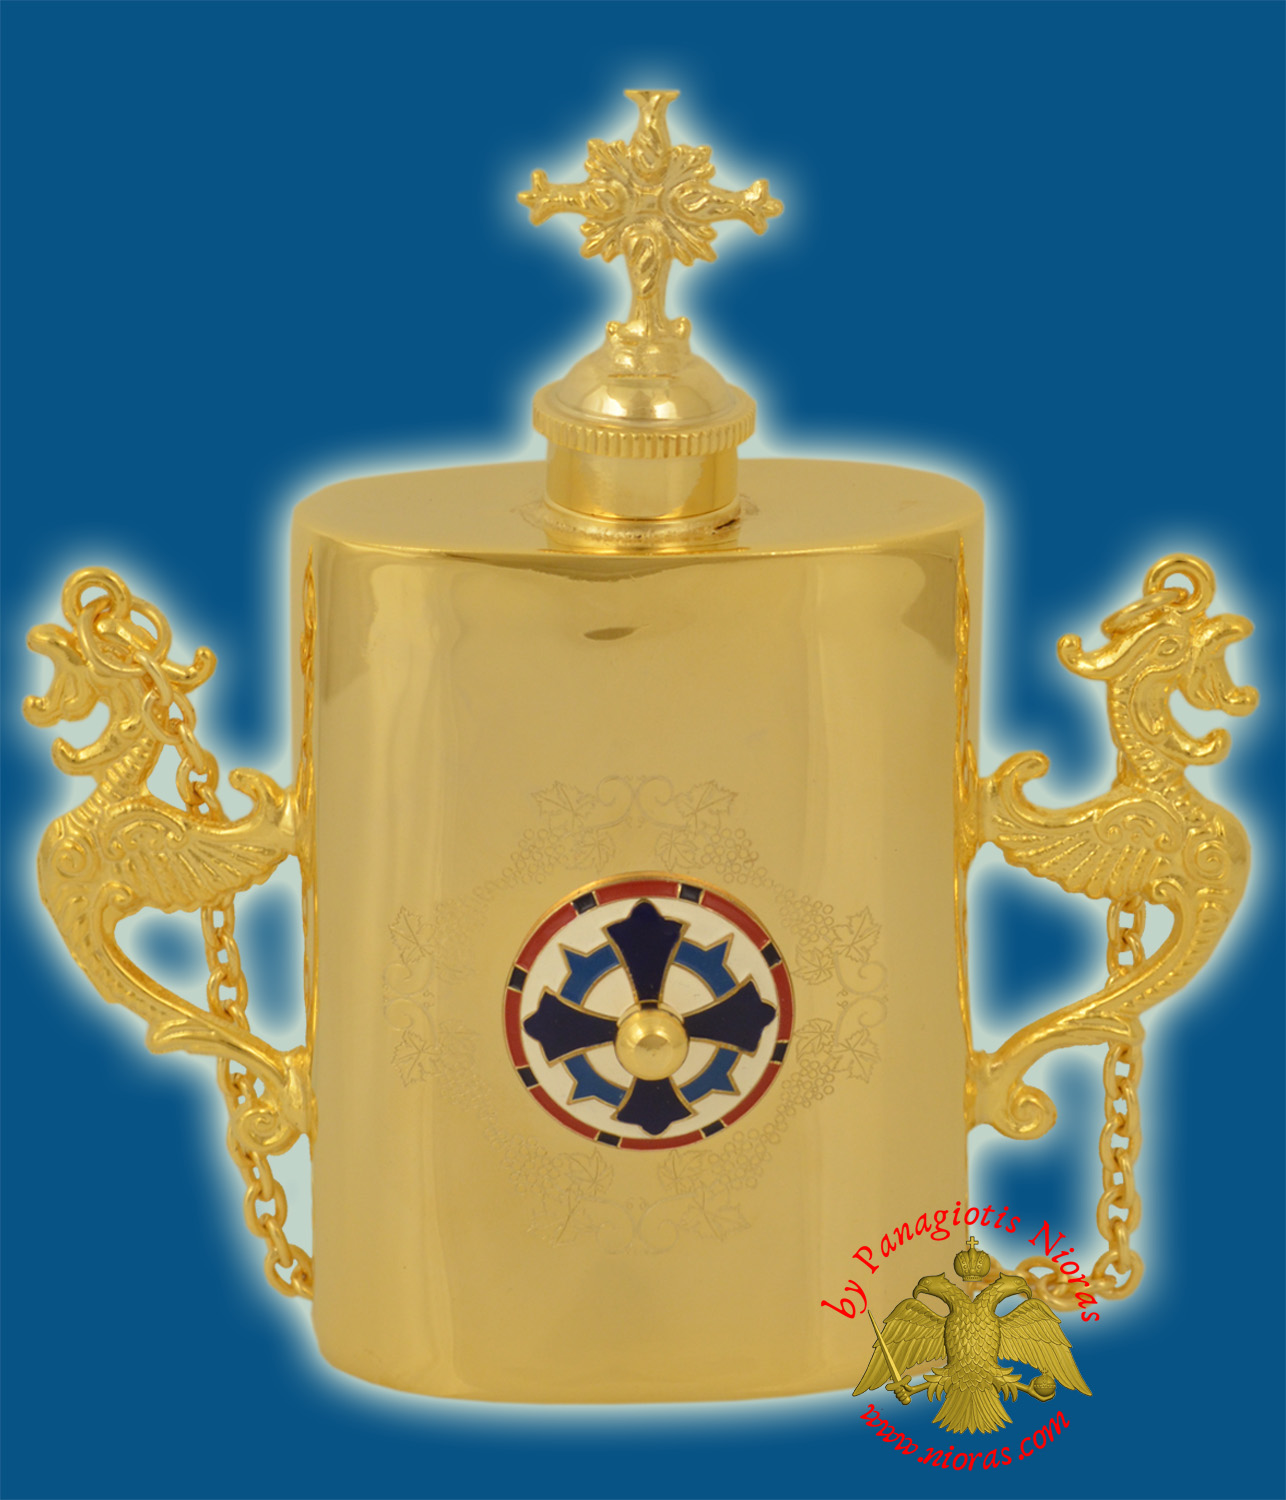 Anointing Holy Oil Gold Plated Metal Vessel With Orthodox Cross Enamel With Vine Engravings